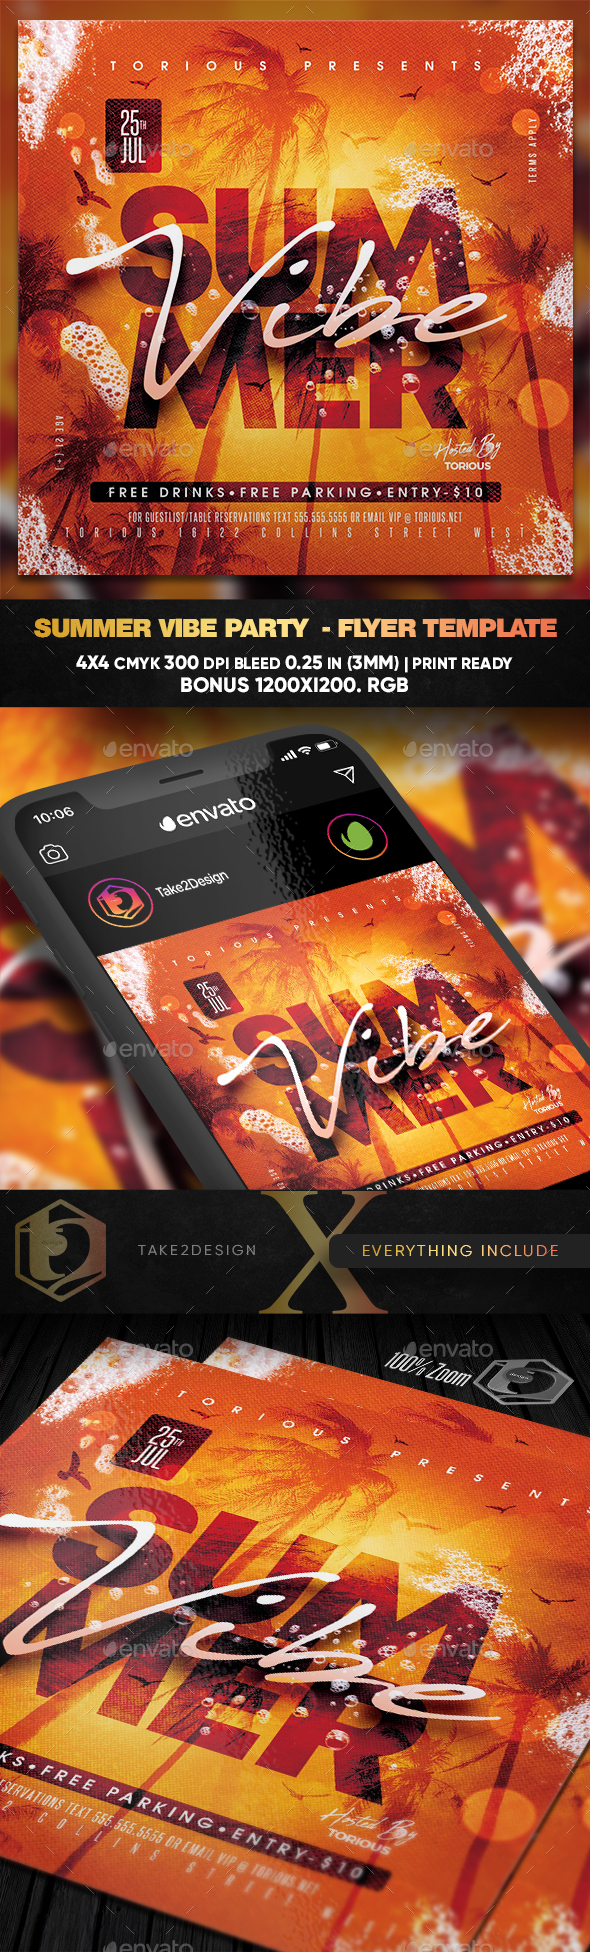 [DOWNLOAD]Summer Vibe Party Flyer Template